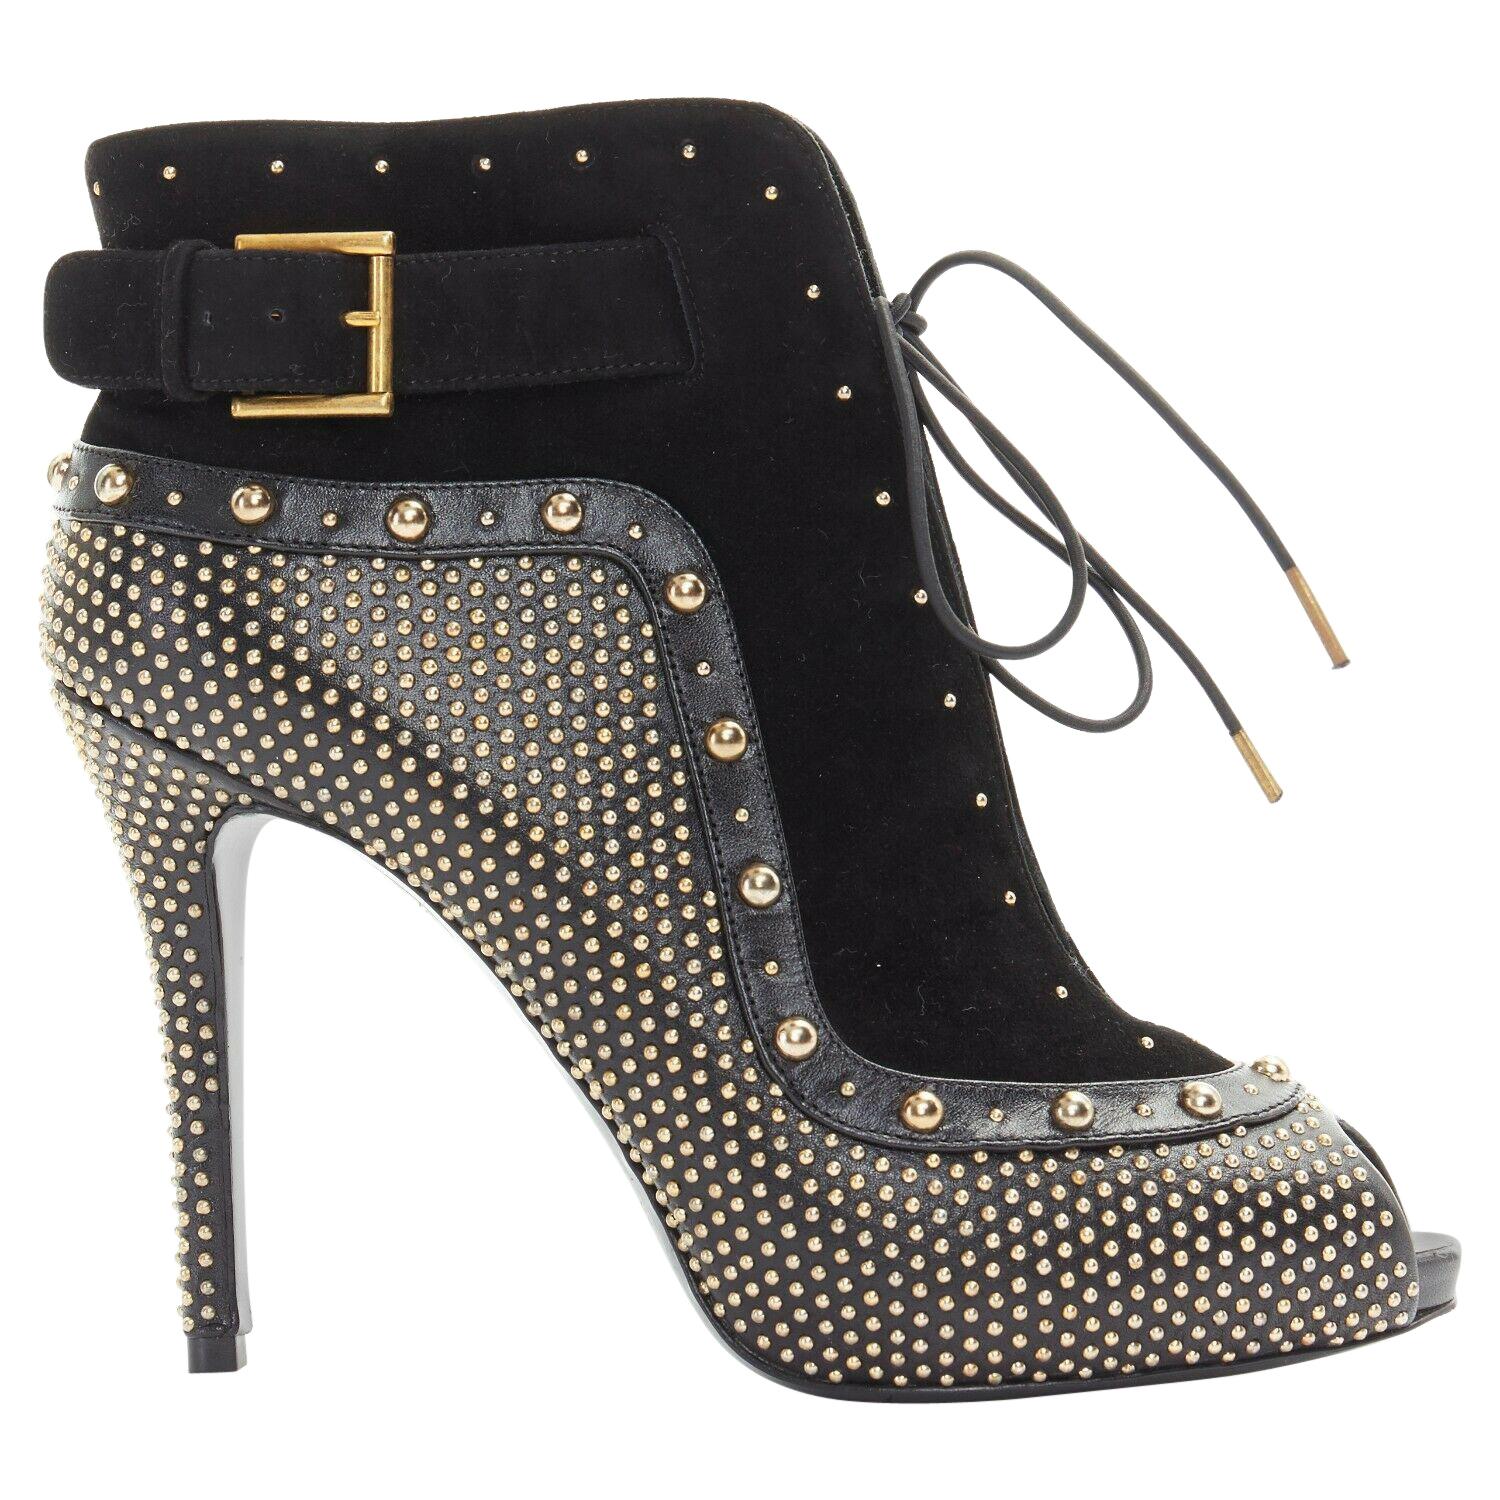 new ALEXANDER MCQUEEN black suede gold stud peep toe lace up ankle bootie EU37